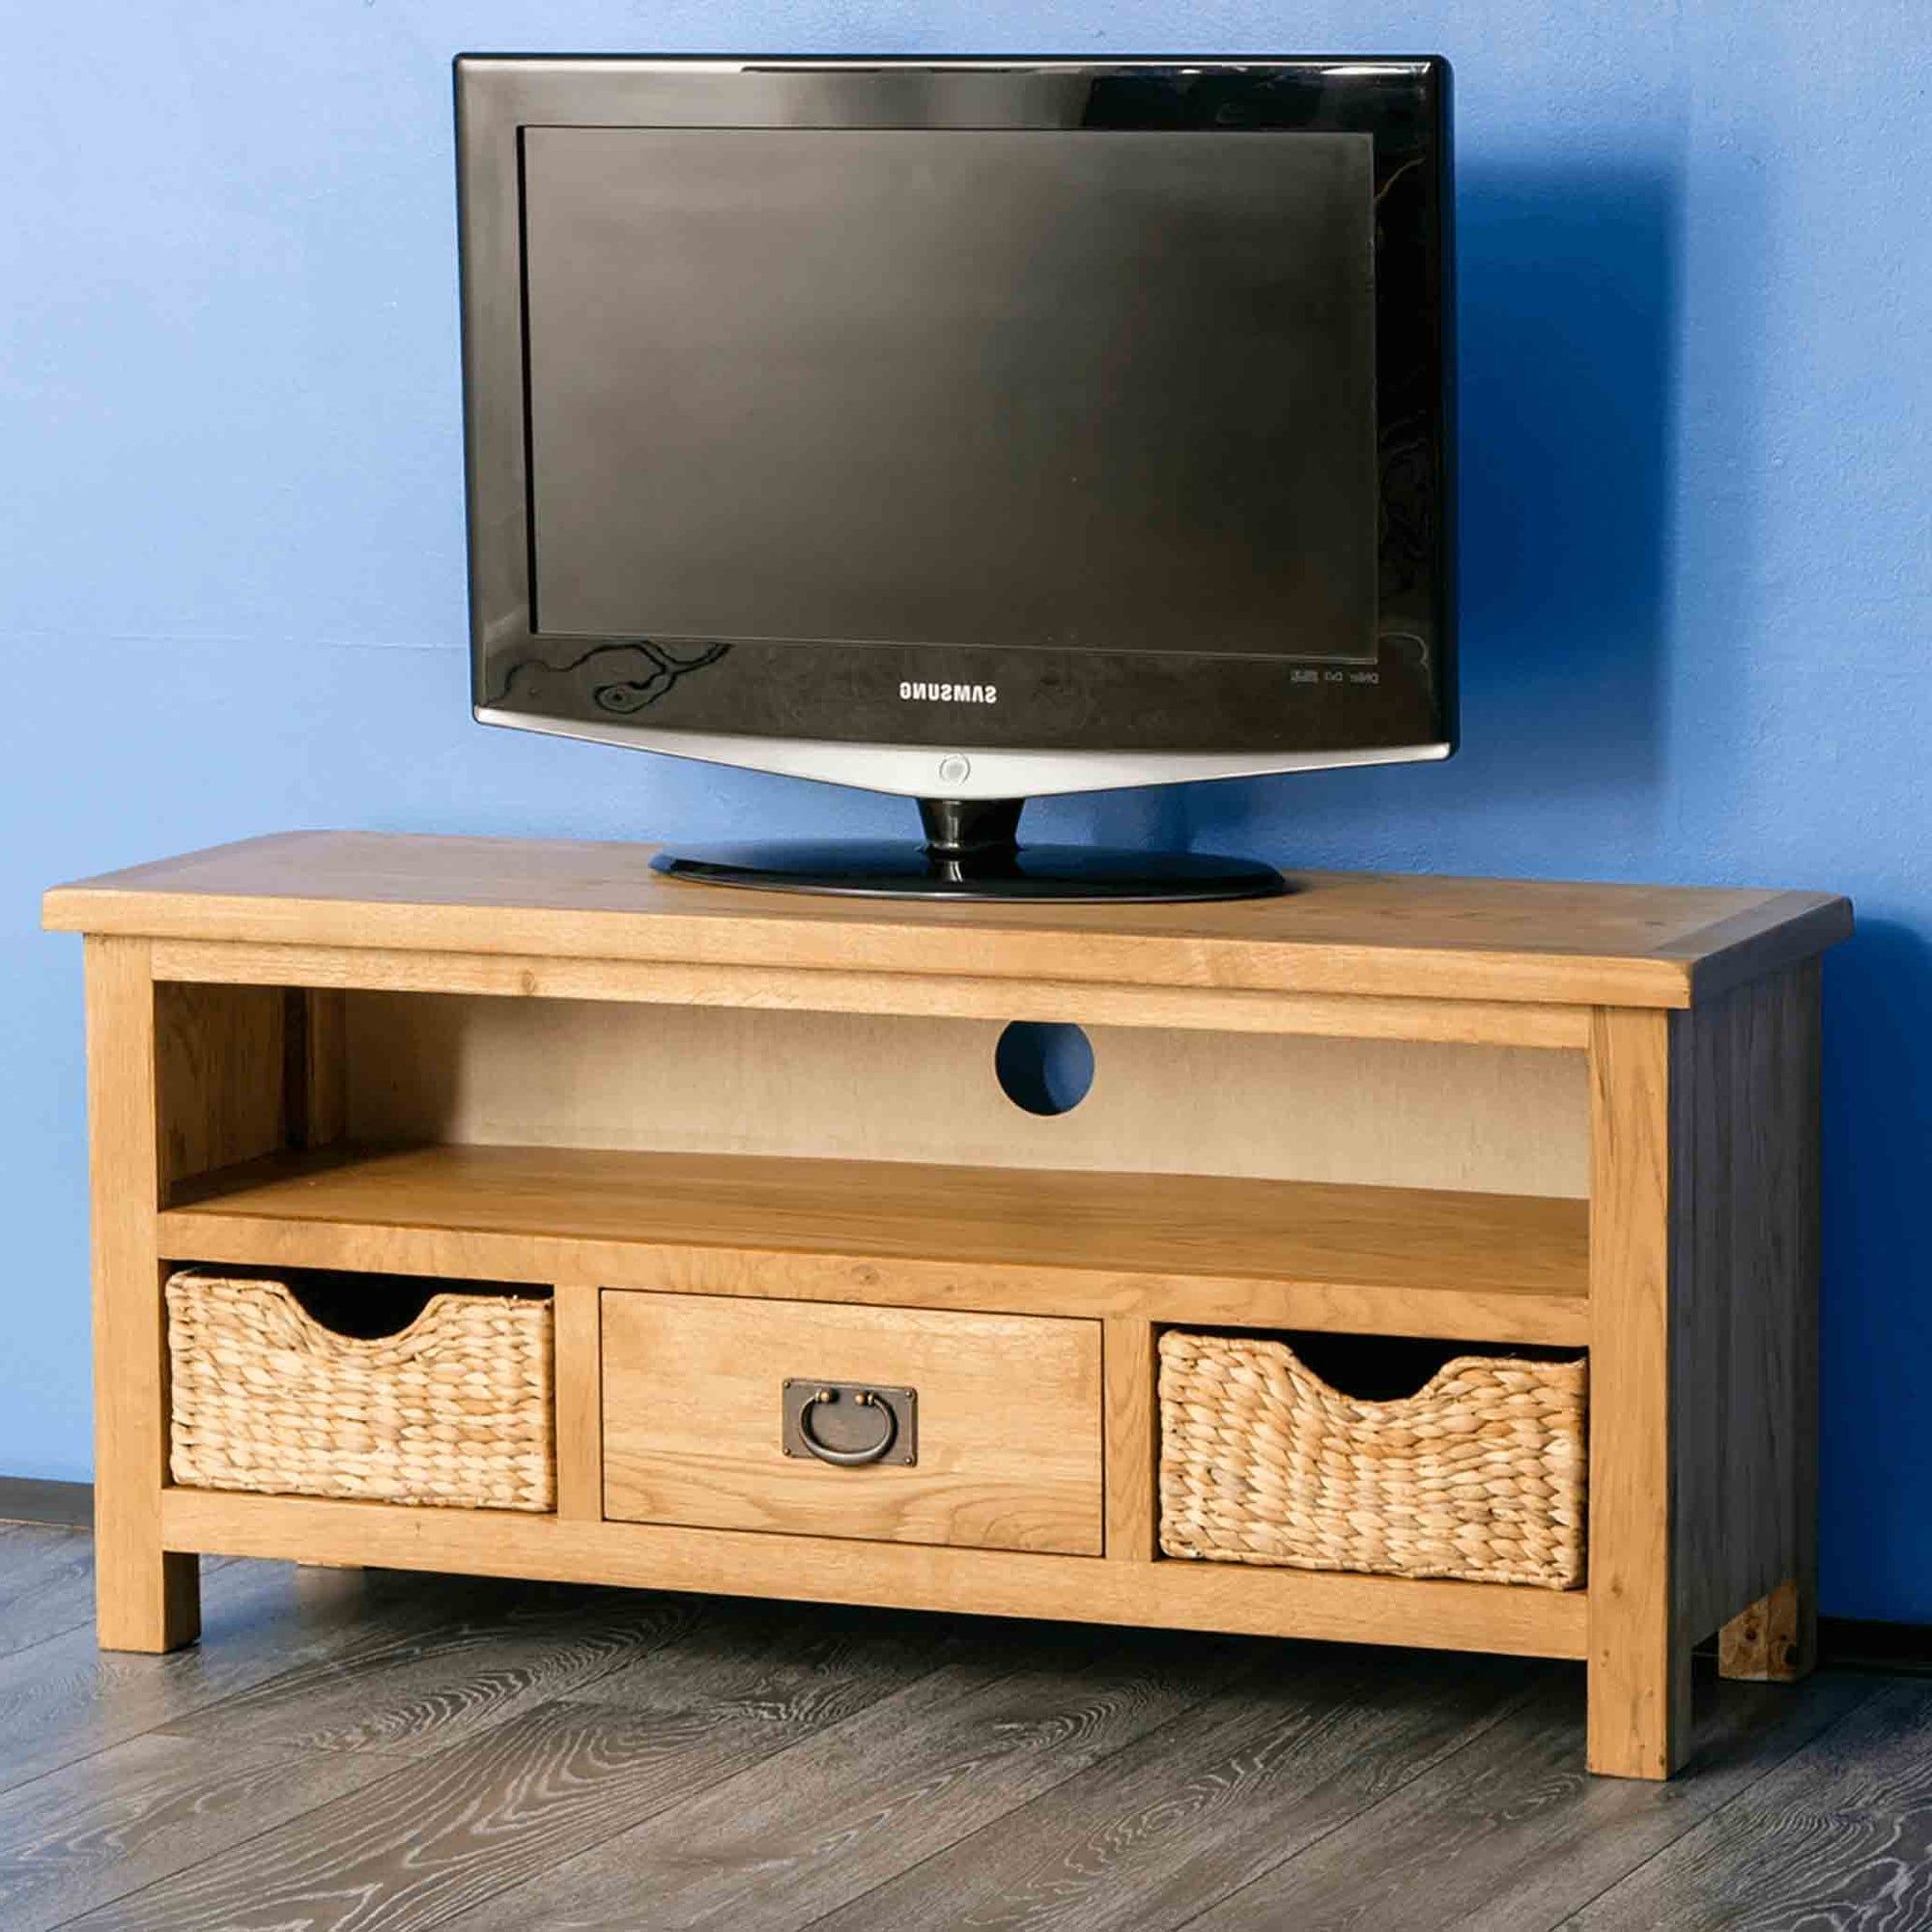 Fashionable Surrey Oak 110cm Large Tv Stand With Baskets, Traditional, Rustic Solid Within Oaklee Tv Stands (View 14 of 15)